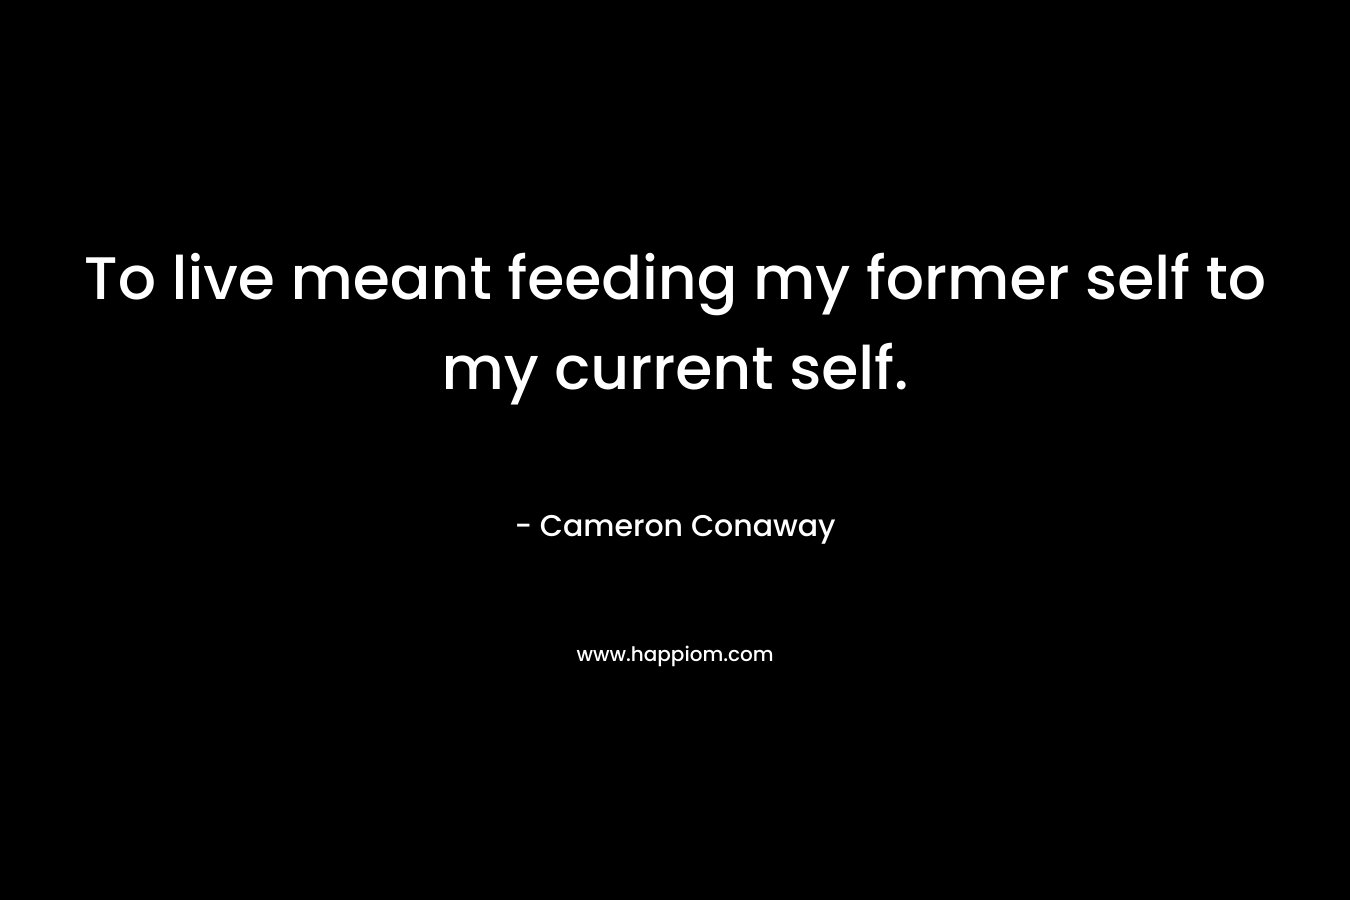 To live meant feeding my former self to my current self. – Cameron Conaway